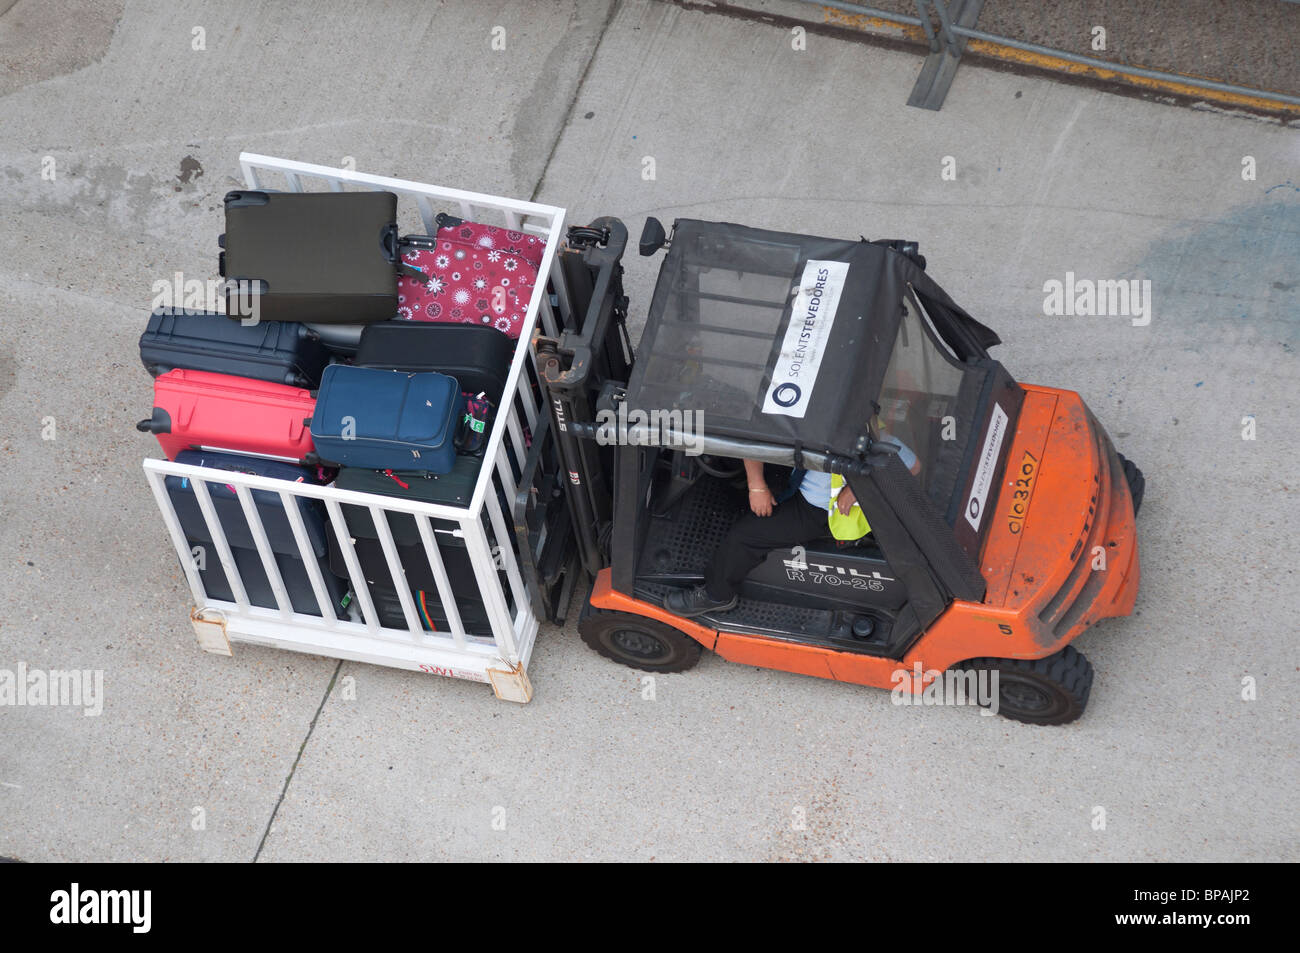 A fork lift truck transporting suitcases to a cruise ship in Southampton, England. Stock Photo